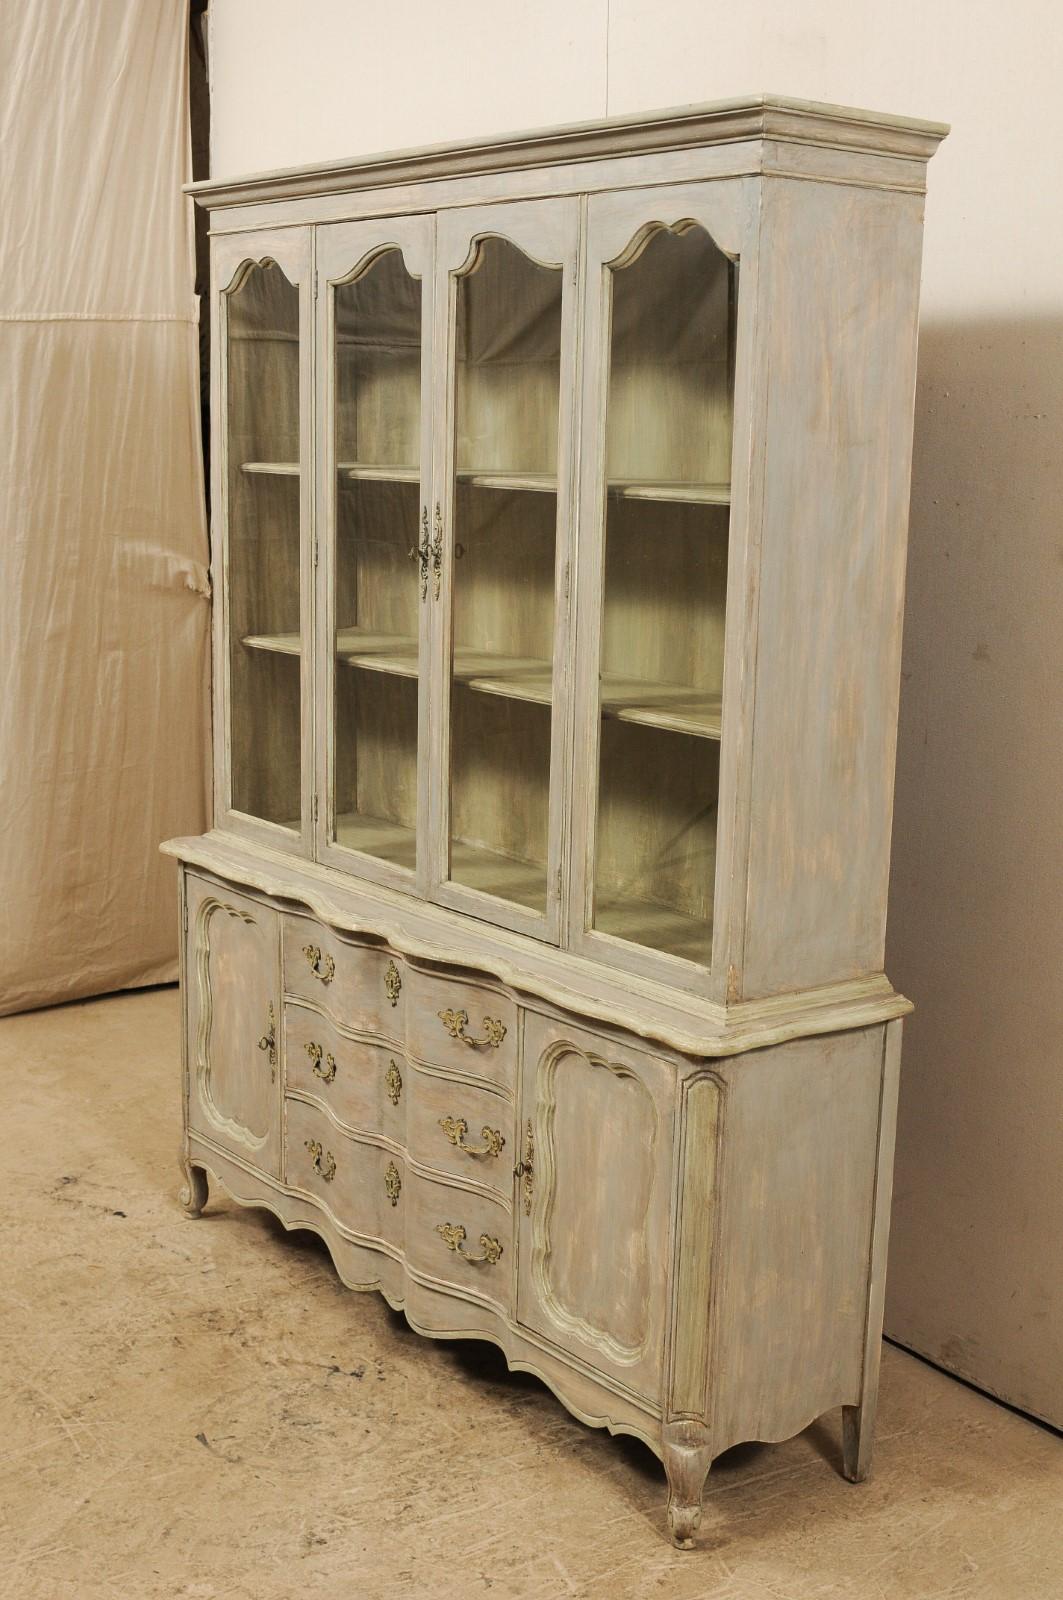 French Style Mid-20th Century Wood and Glass Display and Storage Cabinet im Zustand „Gut“ in Atlanta, GA